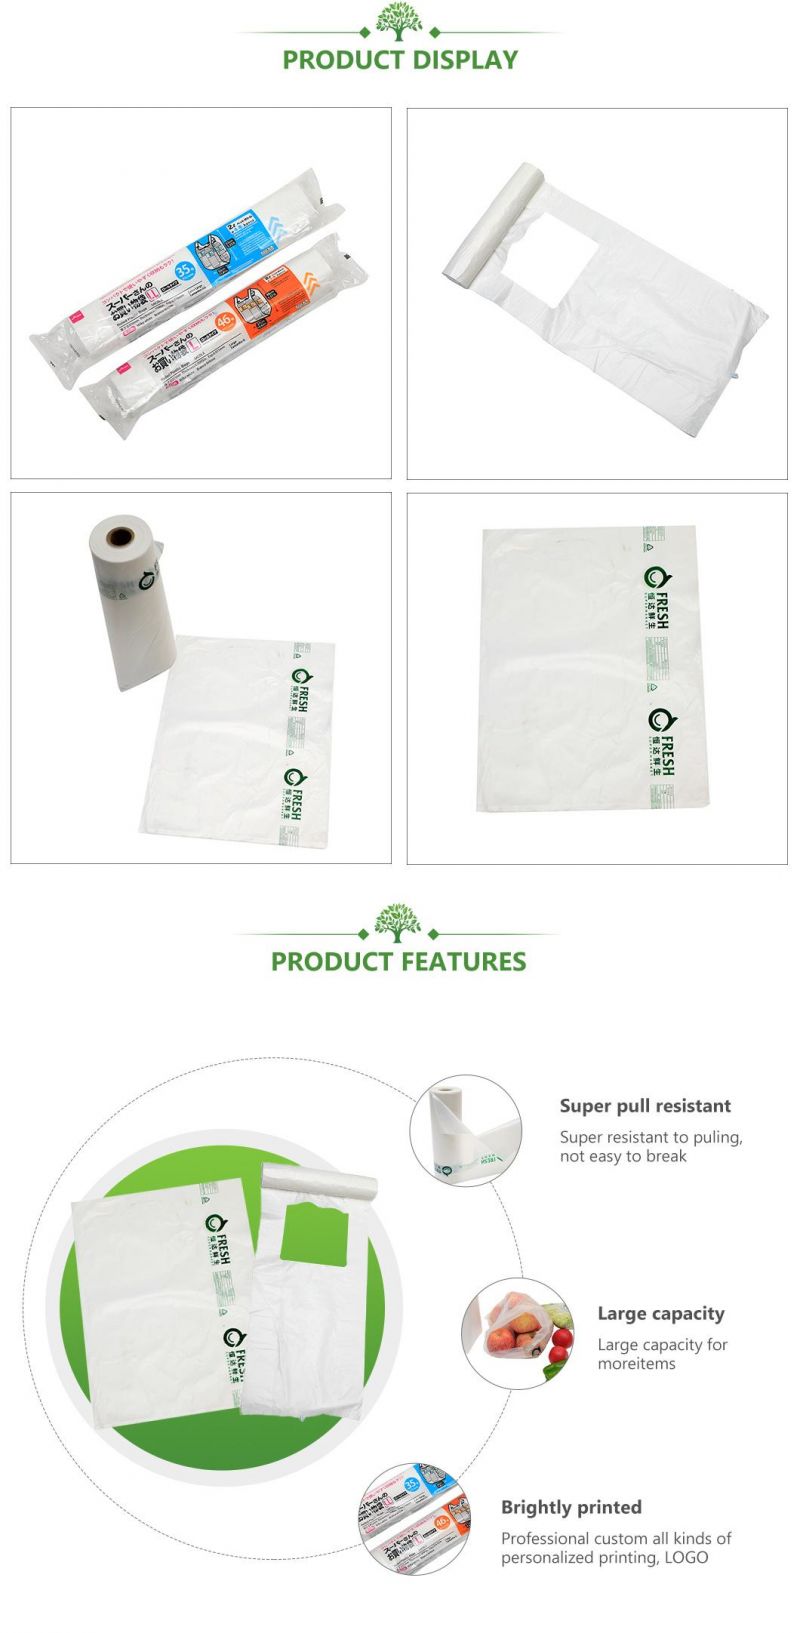 Biodegradable Bags Compostable Flat Roller Food Bags Manufacturer with Ok Compost Home, Ok Compost Industrial, Seeding Certificate